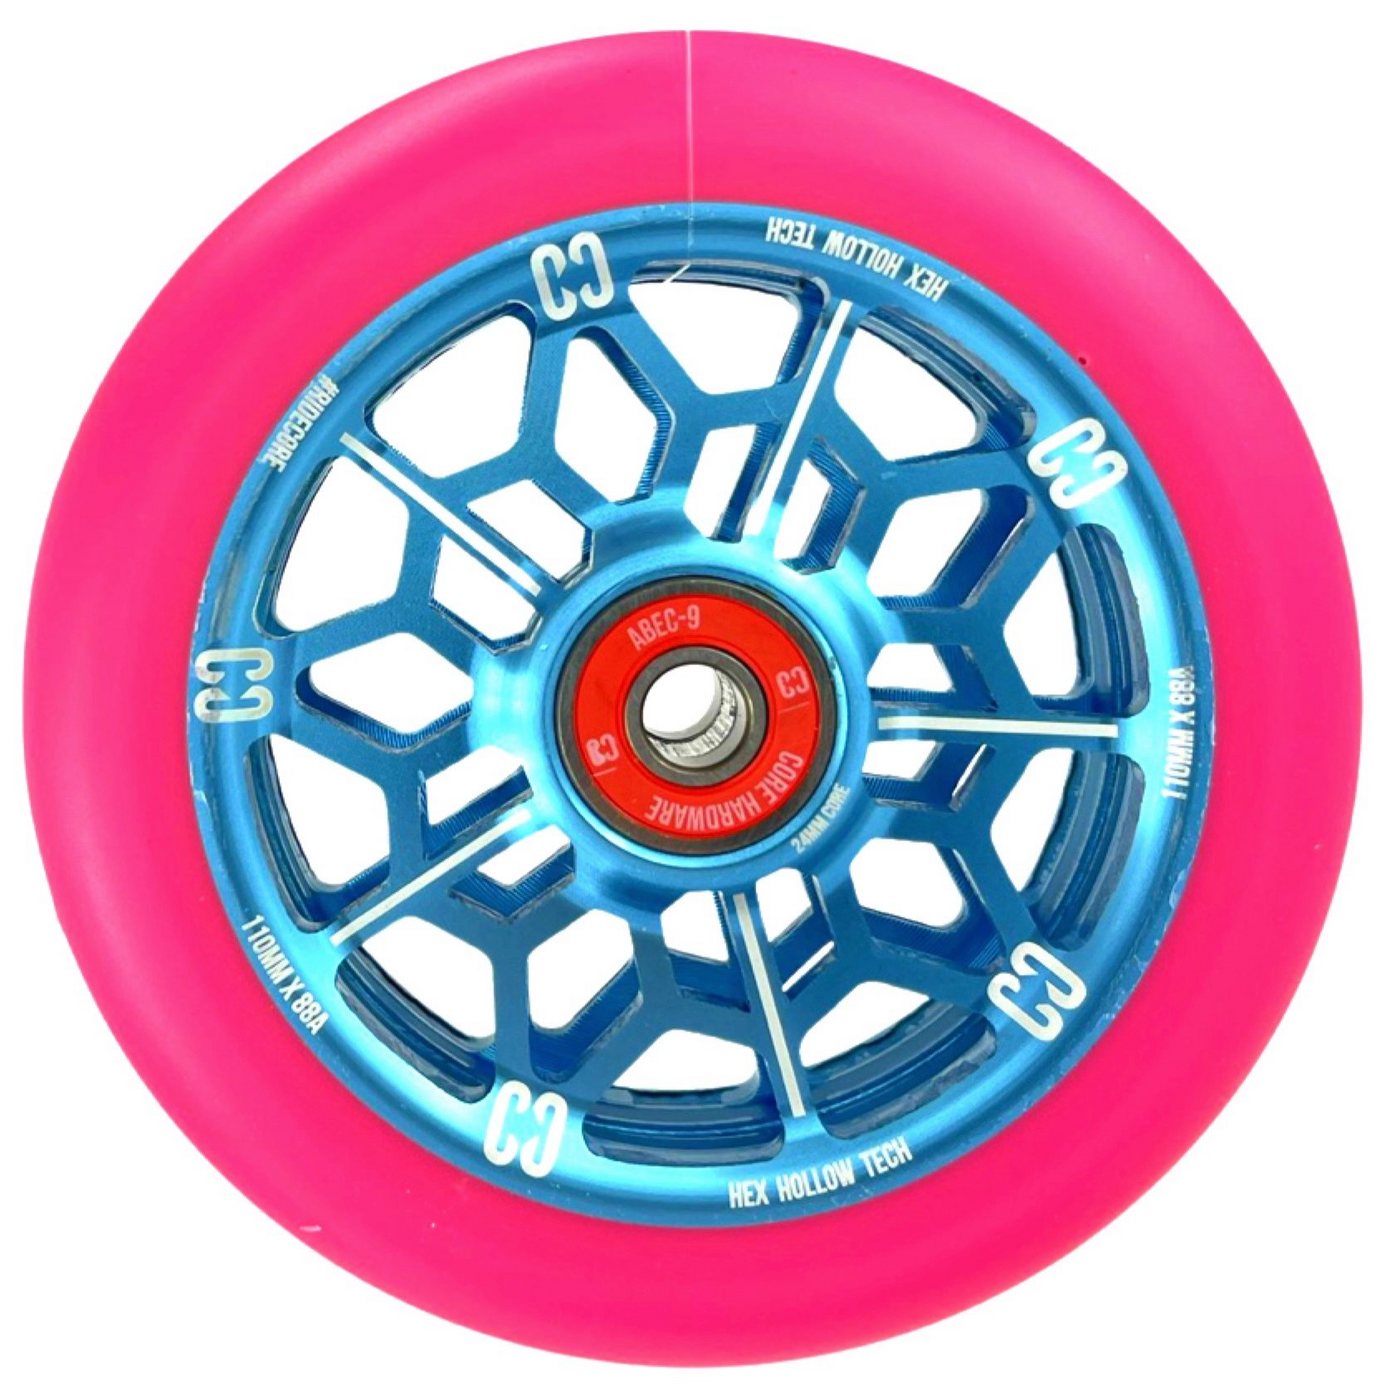 Core Action Sports Stuntscooter Core Hex Hollow Stunt-Scooter Rolle 110mm Hellblau/PU Pink von Core Action Sports